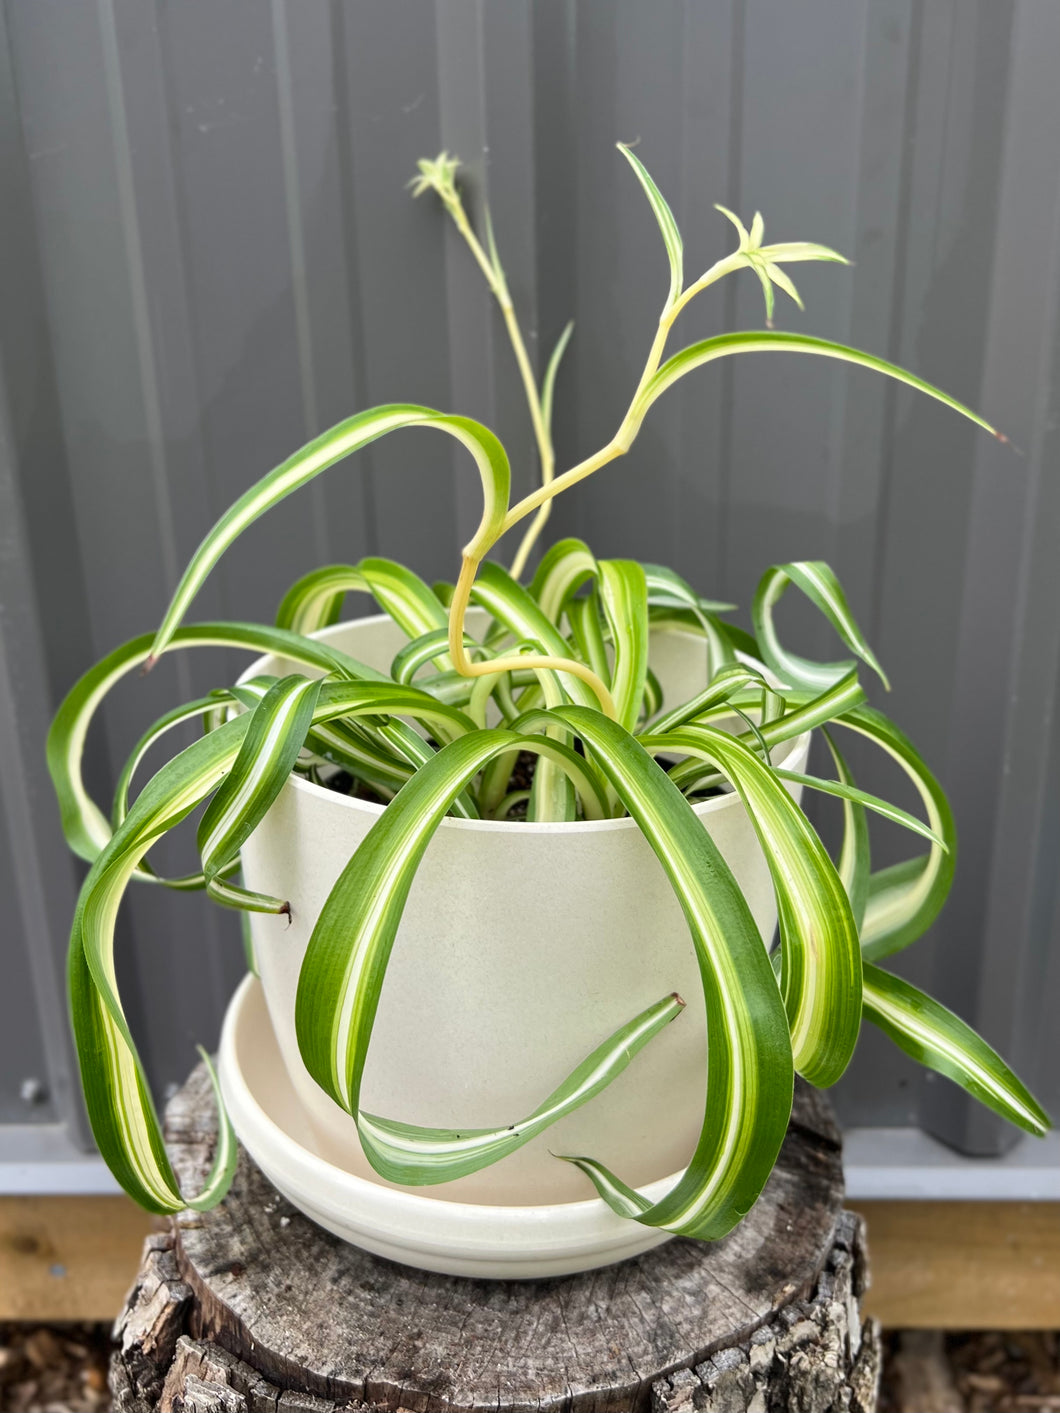 Spider Plant: Curly